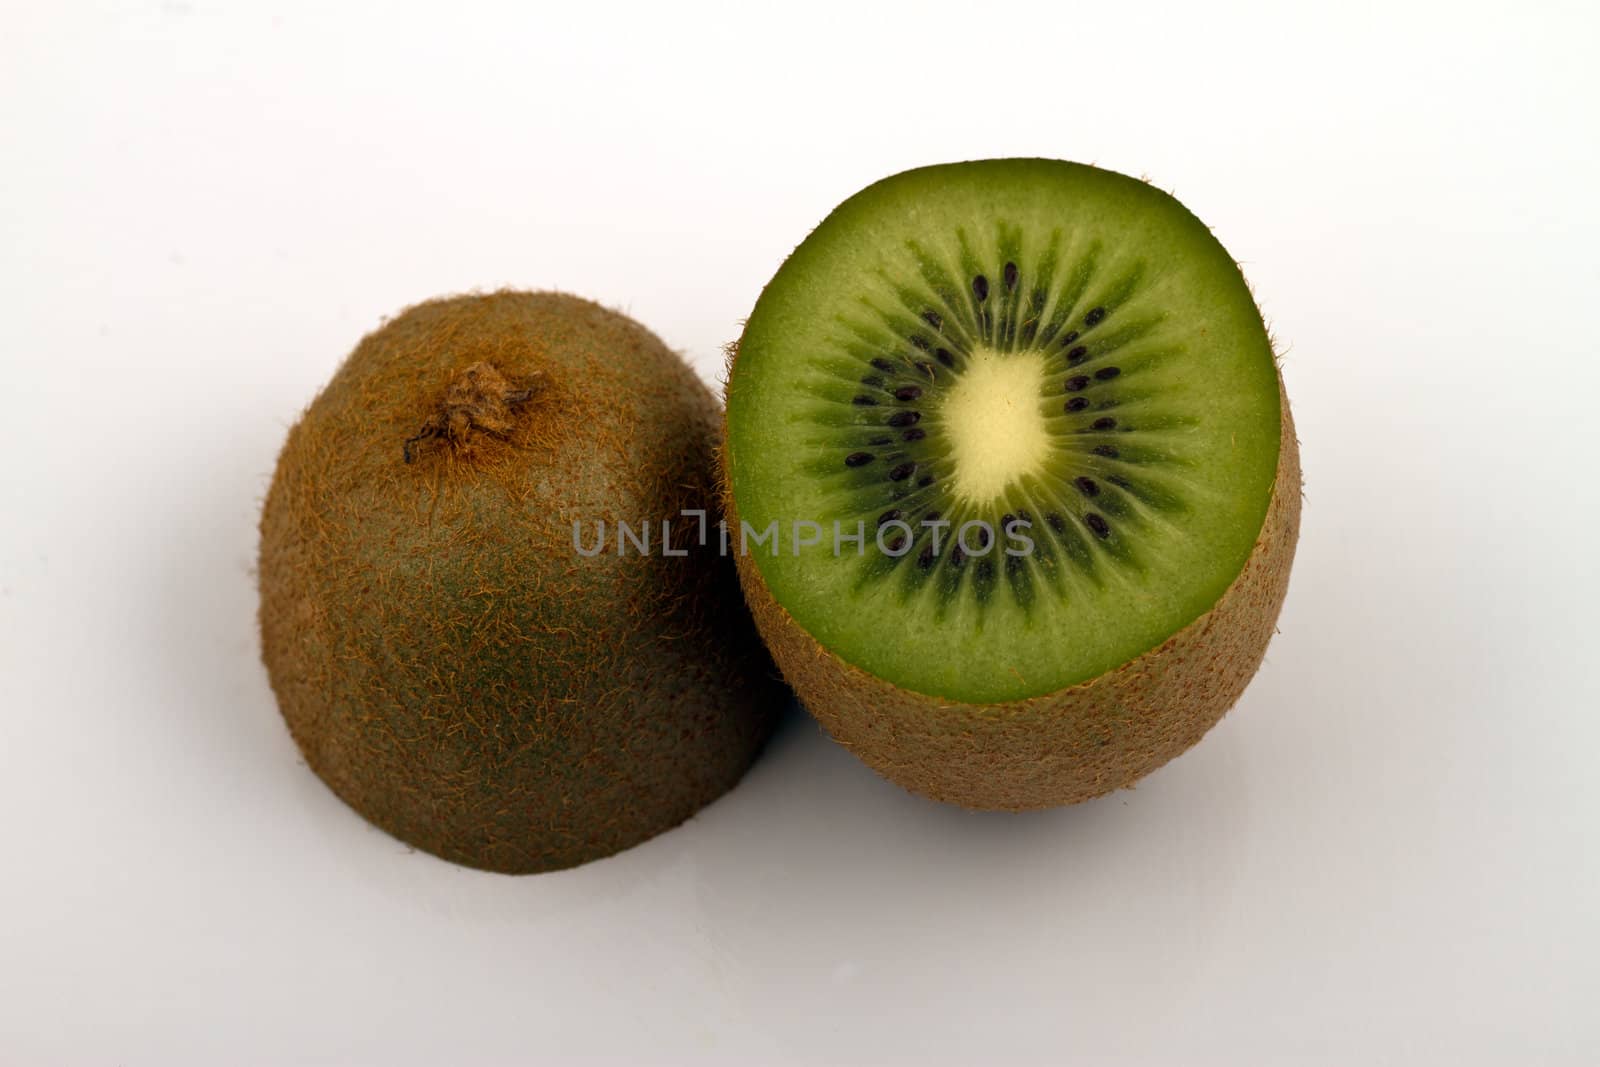 Kiwi halved and placed on white surface